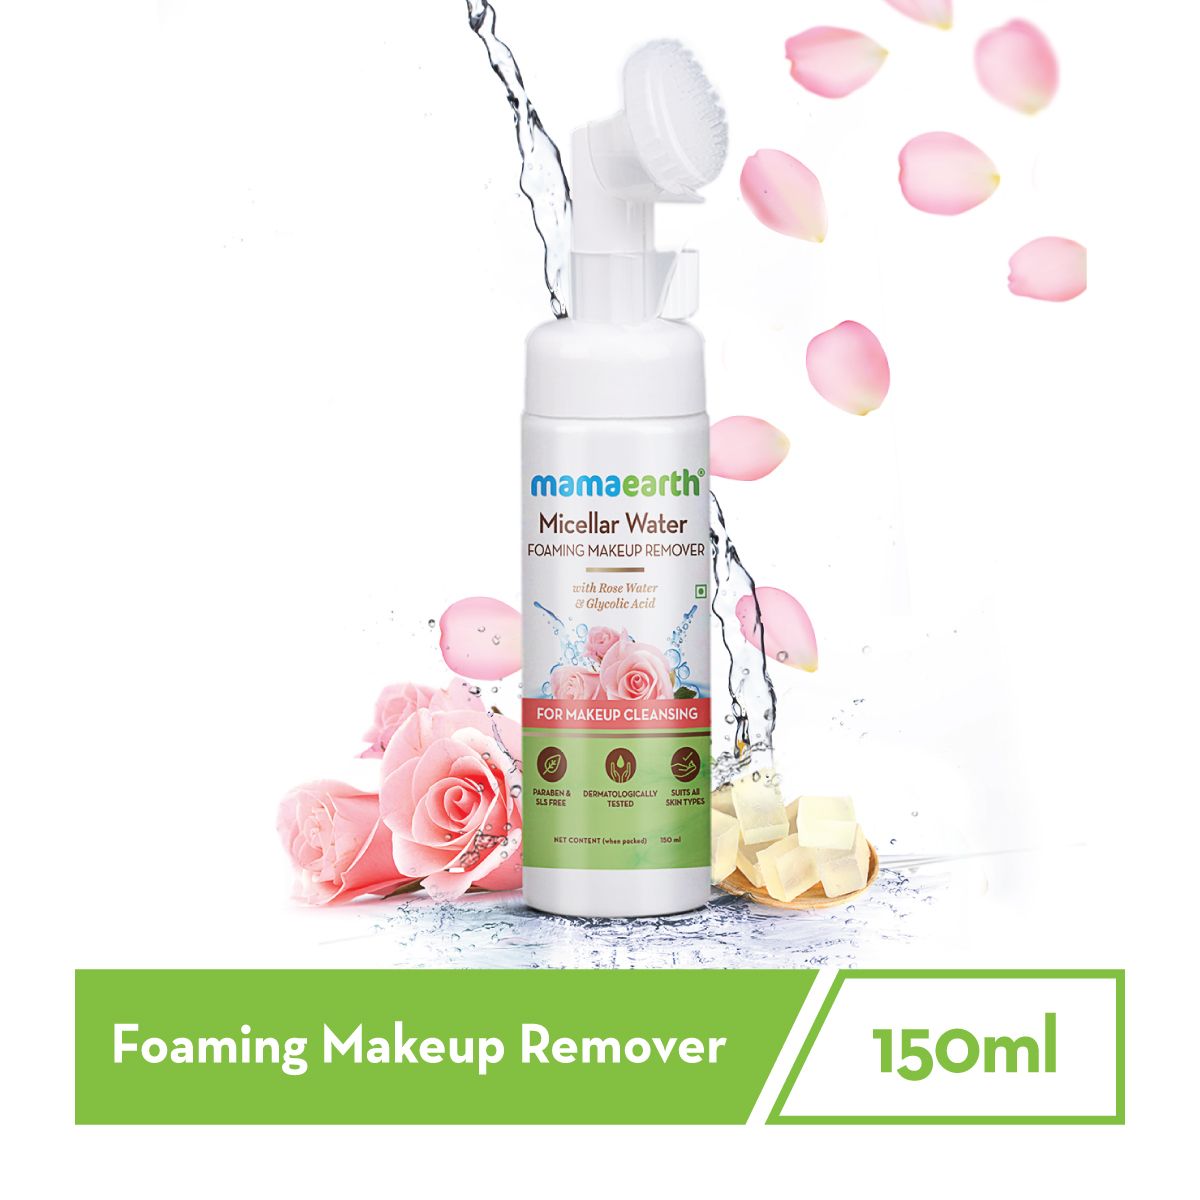 Mamaearth Micellar Water Foaming Makeup Remover Better Than Others Available In The Market